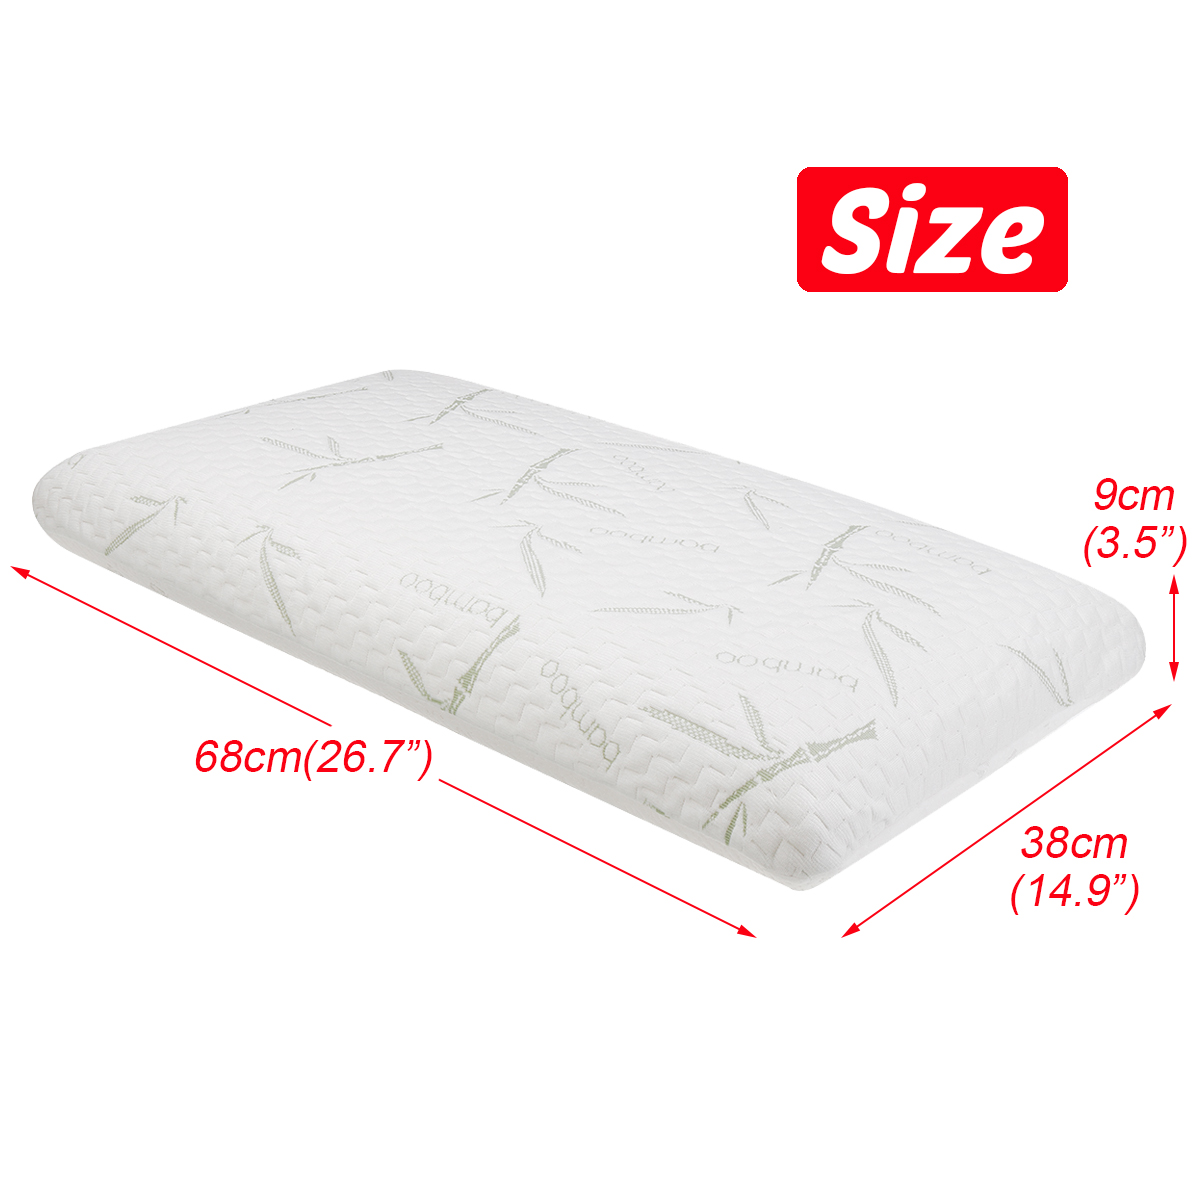 Bamboo-Memory-Foam-Pillow-Reversible-Pillow-Orthopedic-Slow-Rebound-Cervical-Neck-Pain-Relief-1813962-7